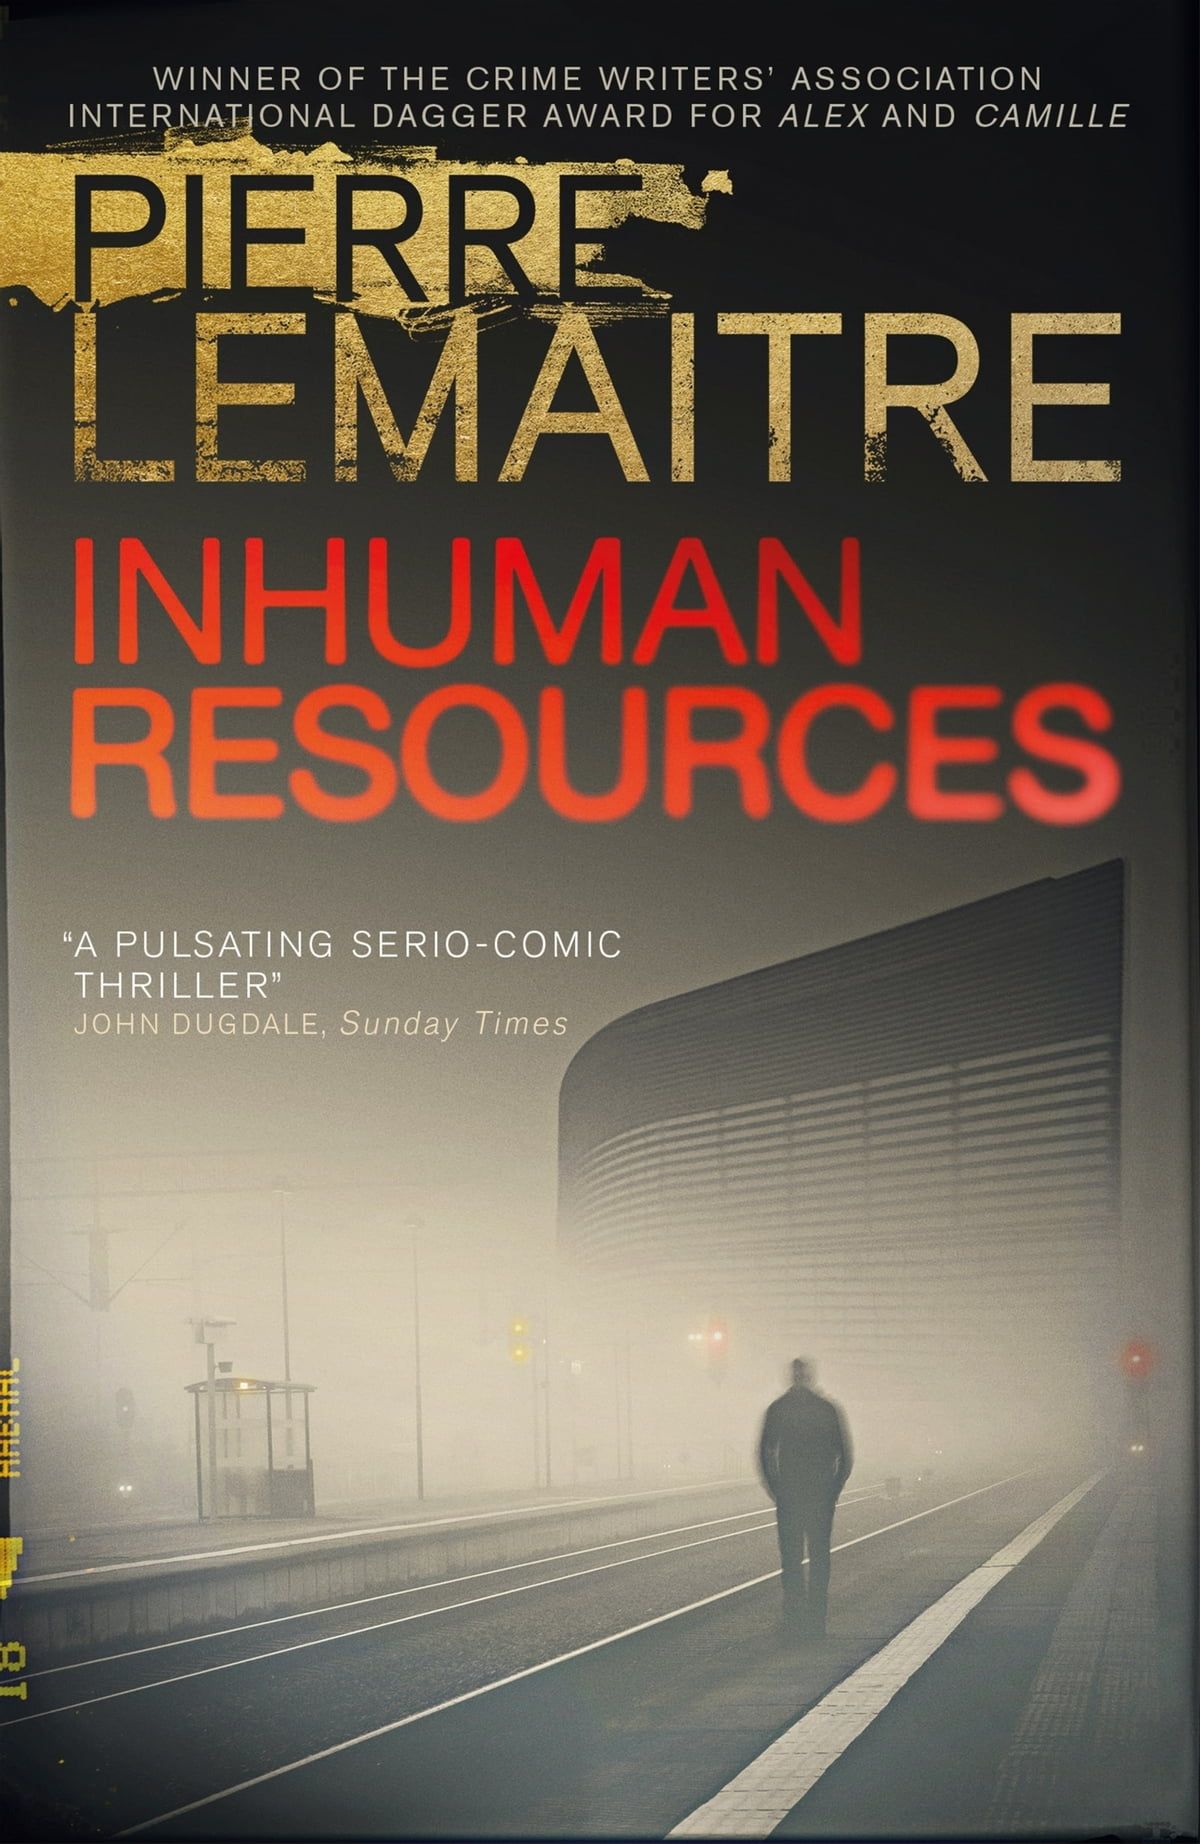 Inhuman Resources by Pierre LeMaitre book cover